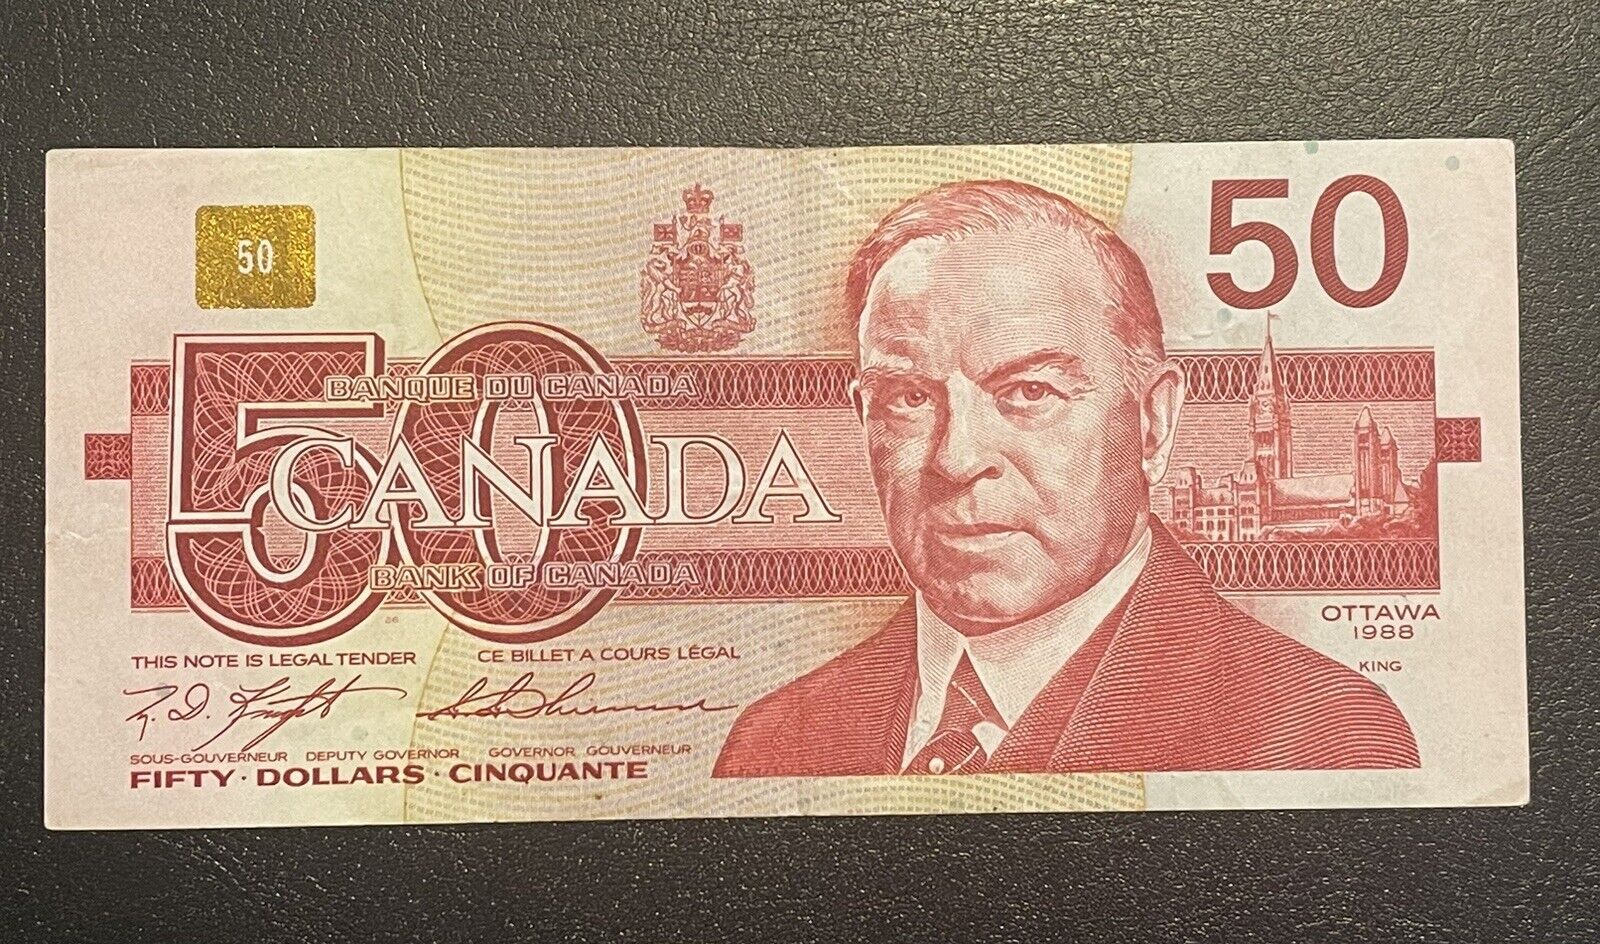 1988 Canadian $50 bill with owl on the back